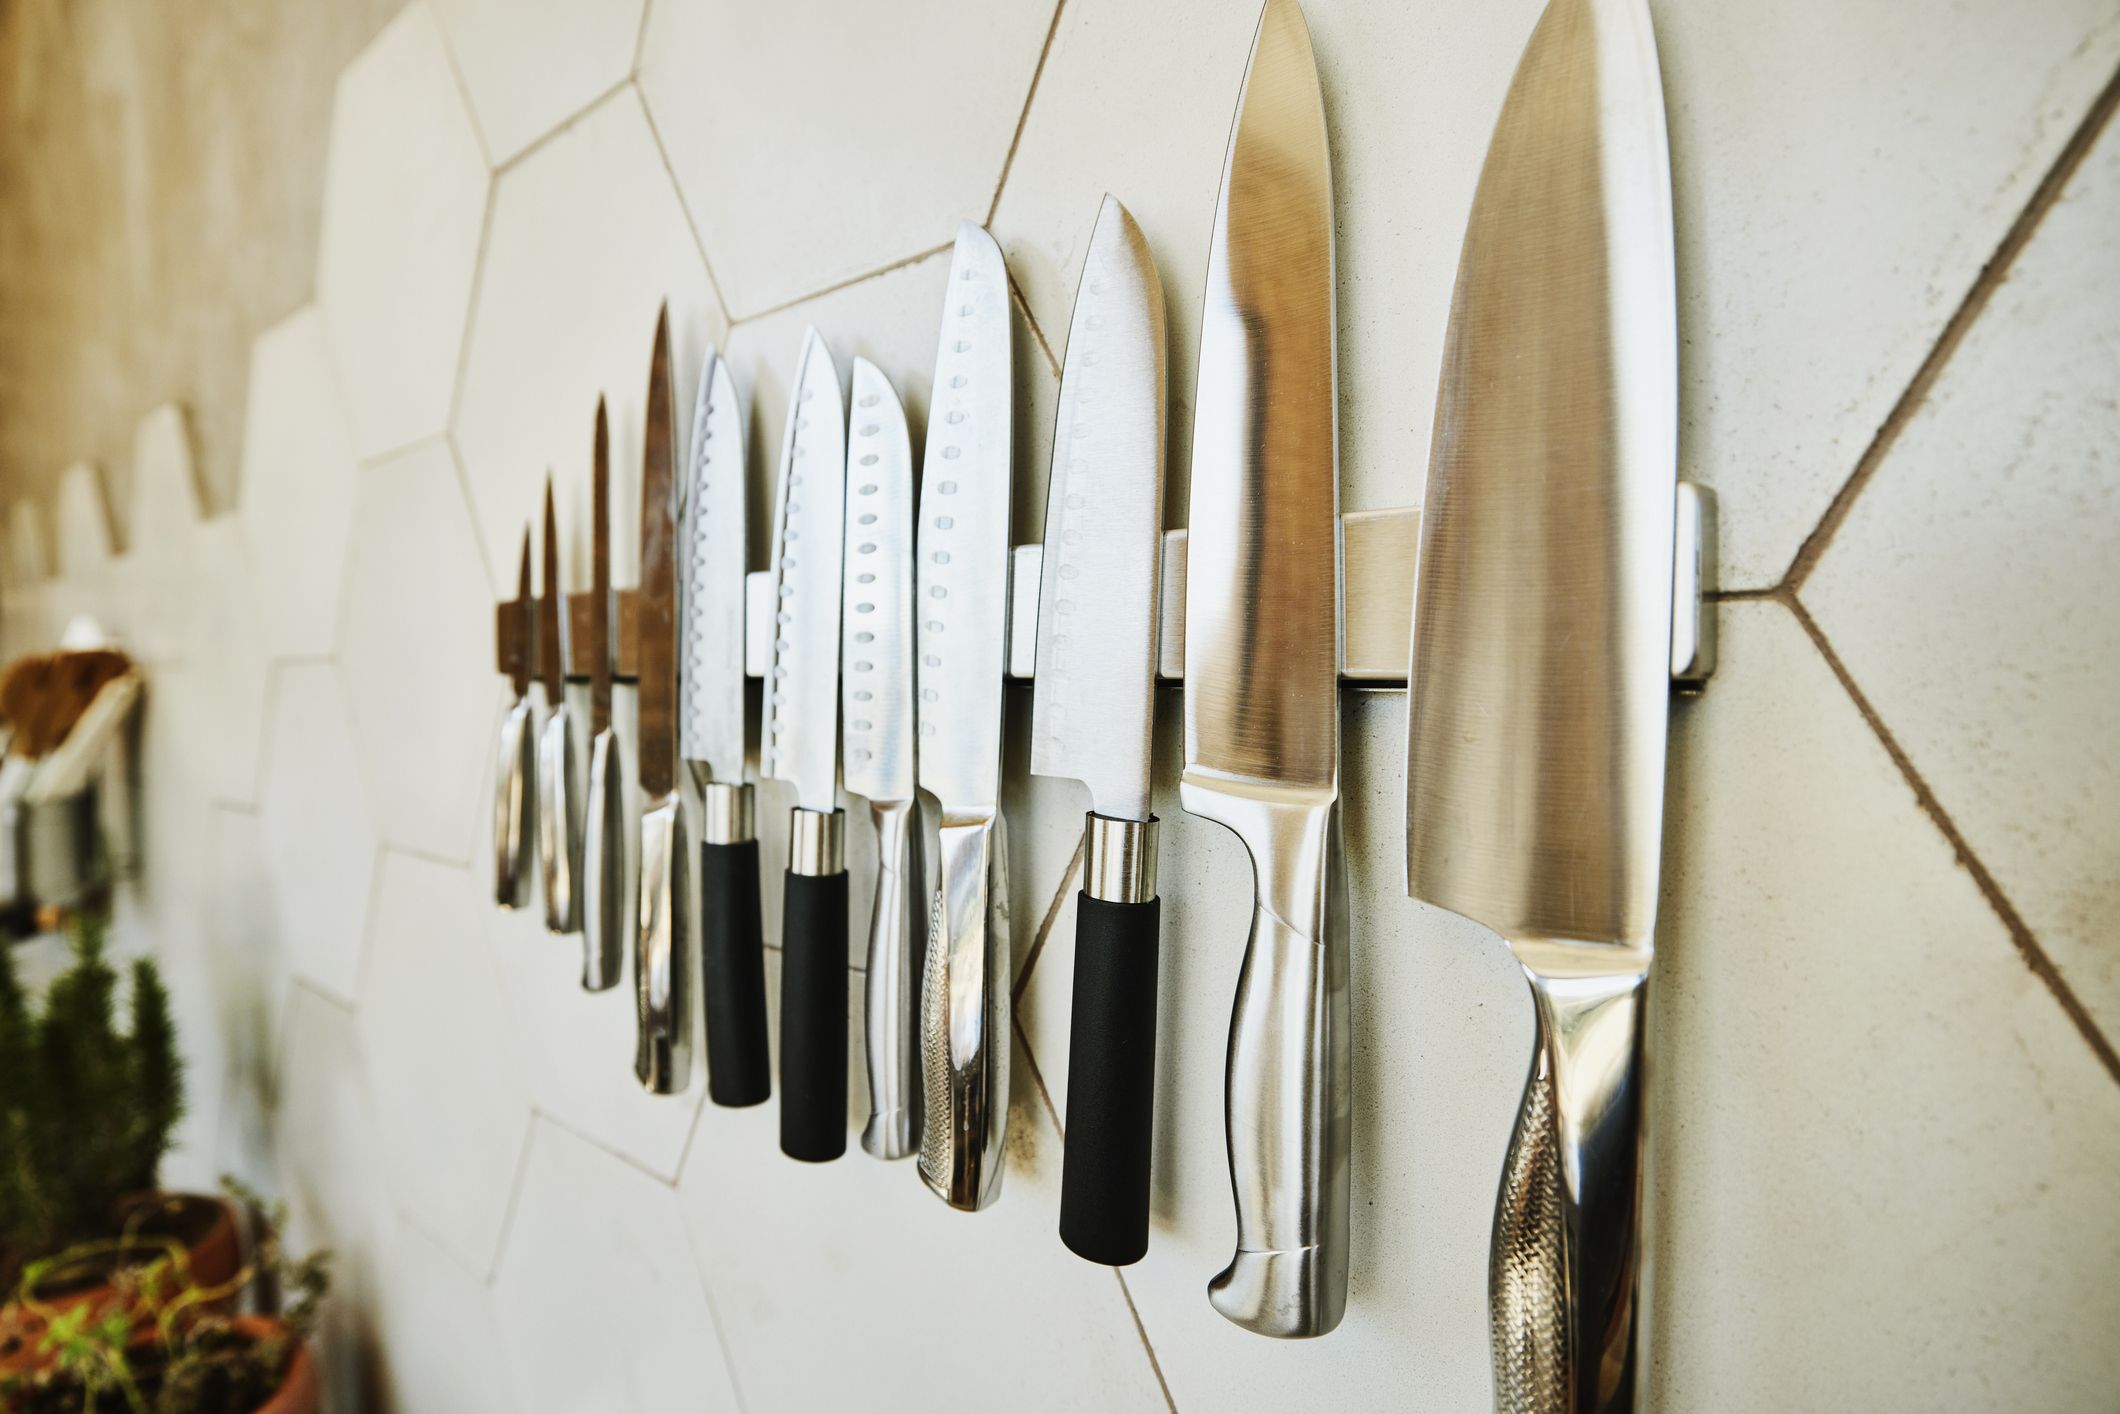 Buy a Choice Whetstone Holder for All Your Kitchen Knife